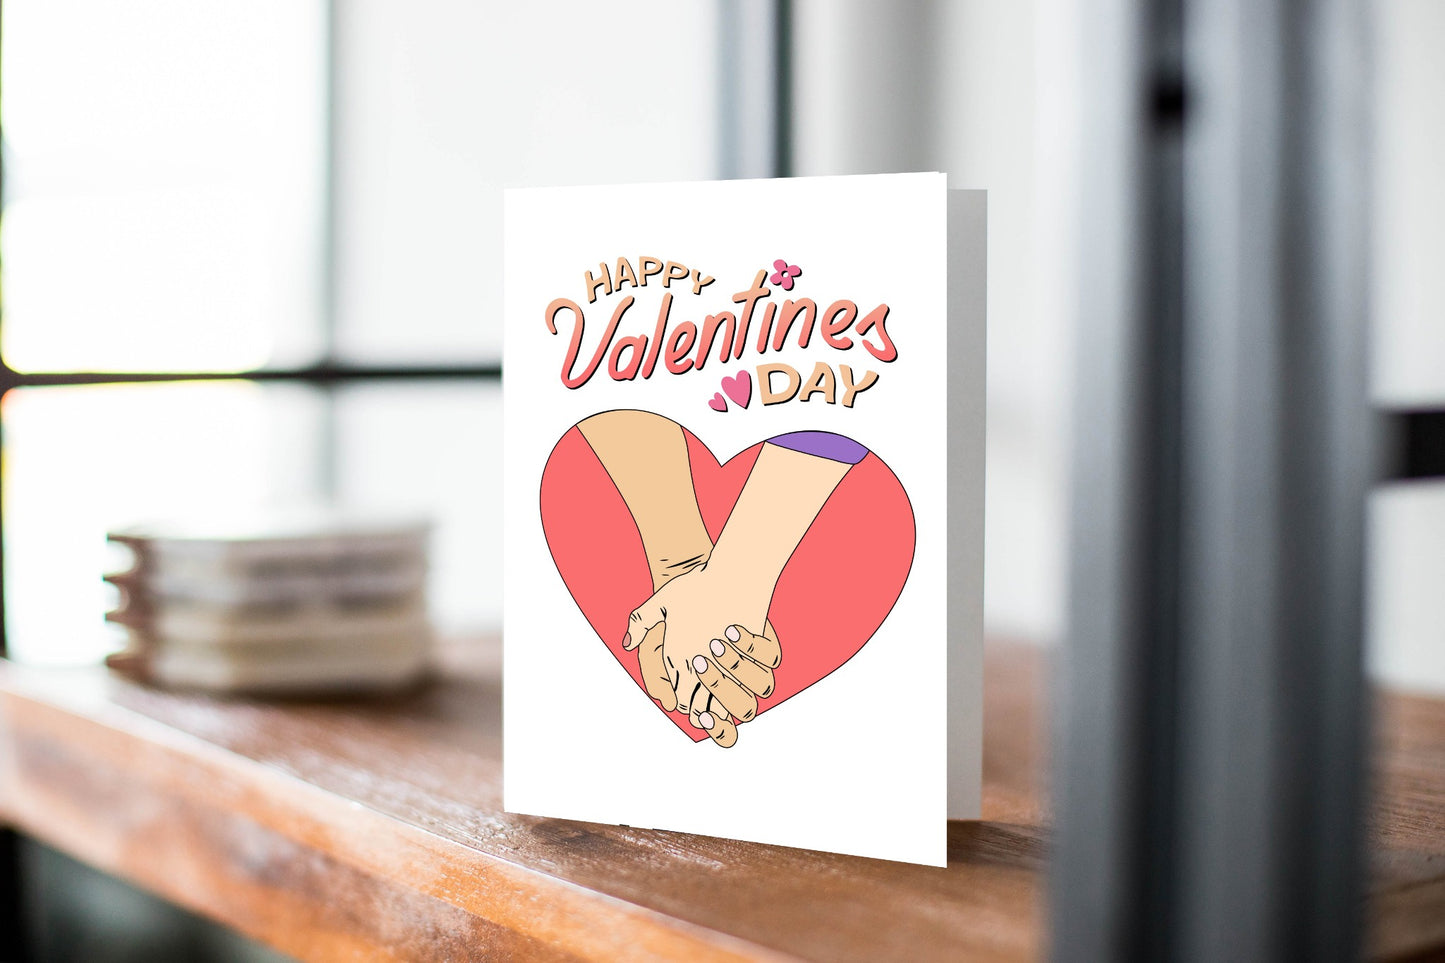 Happy Valentines Day, Hands in Heart Greeting Card